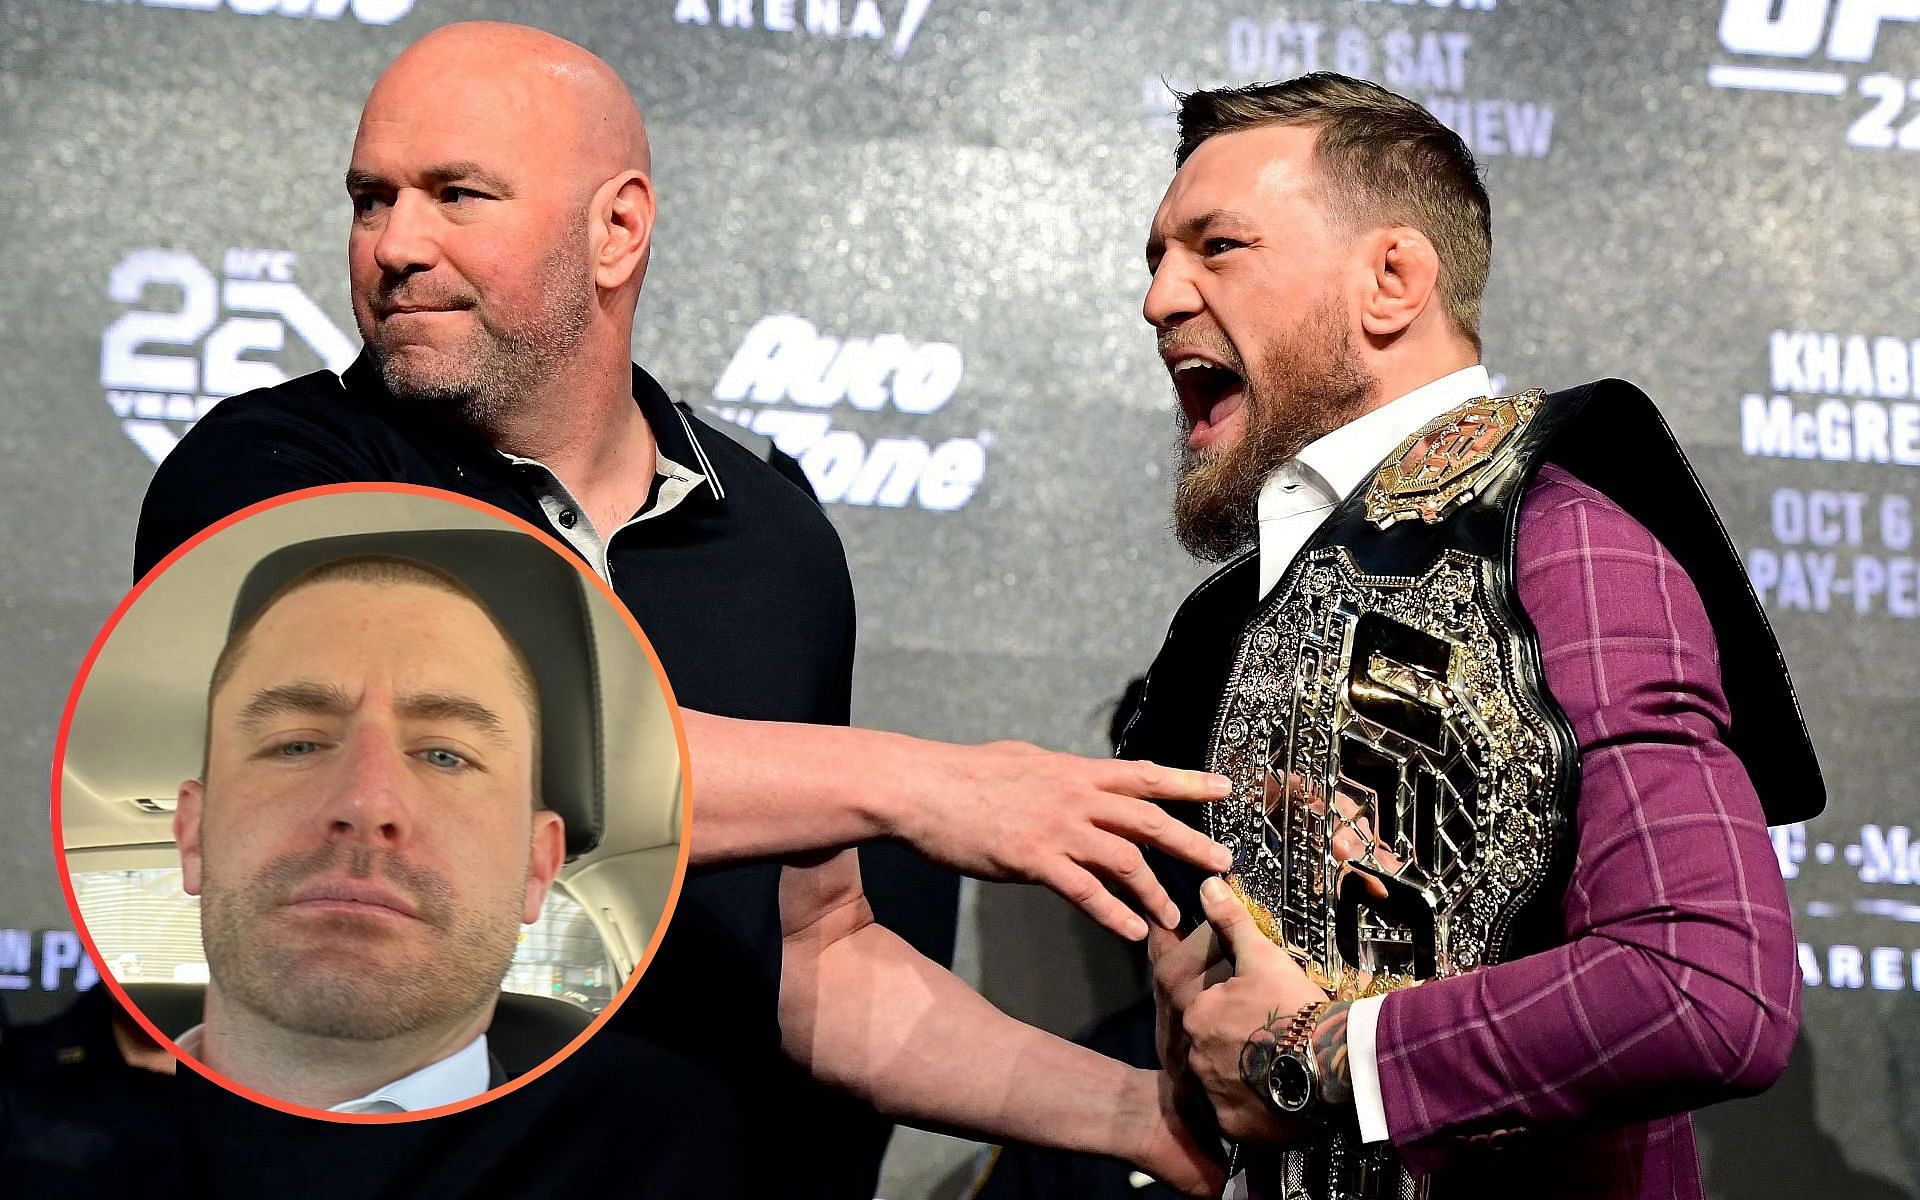 Former NELK Boy Bob Menery claims Dana White hanged up video after Conor McGregor came on screen